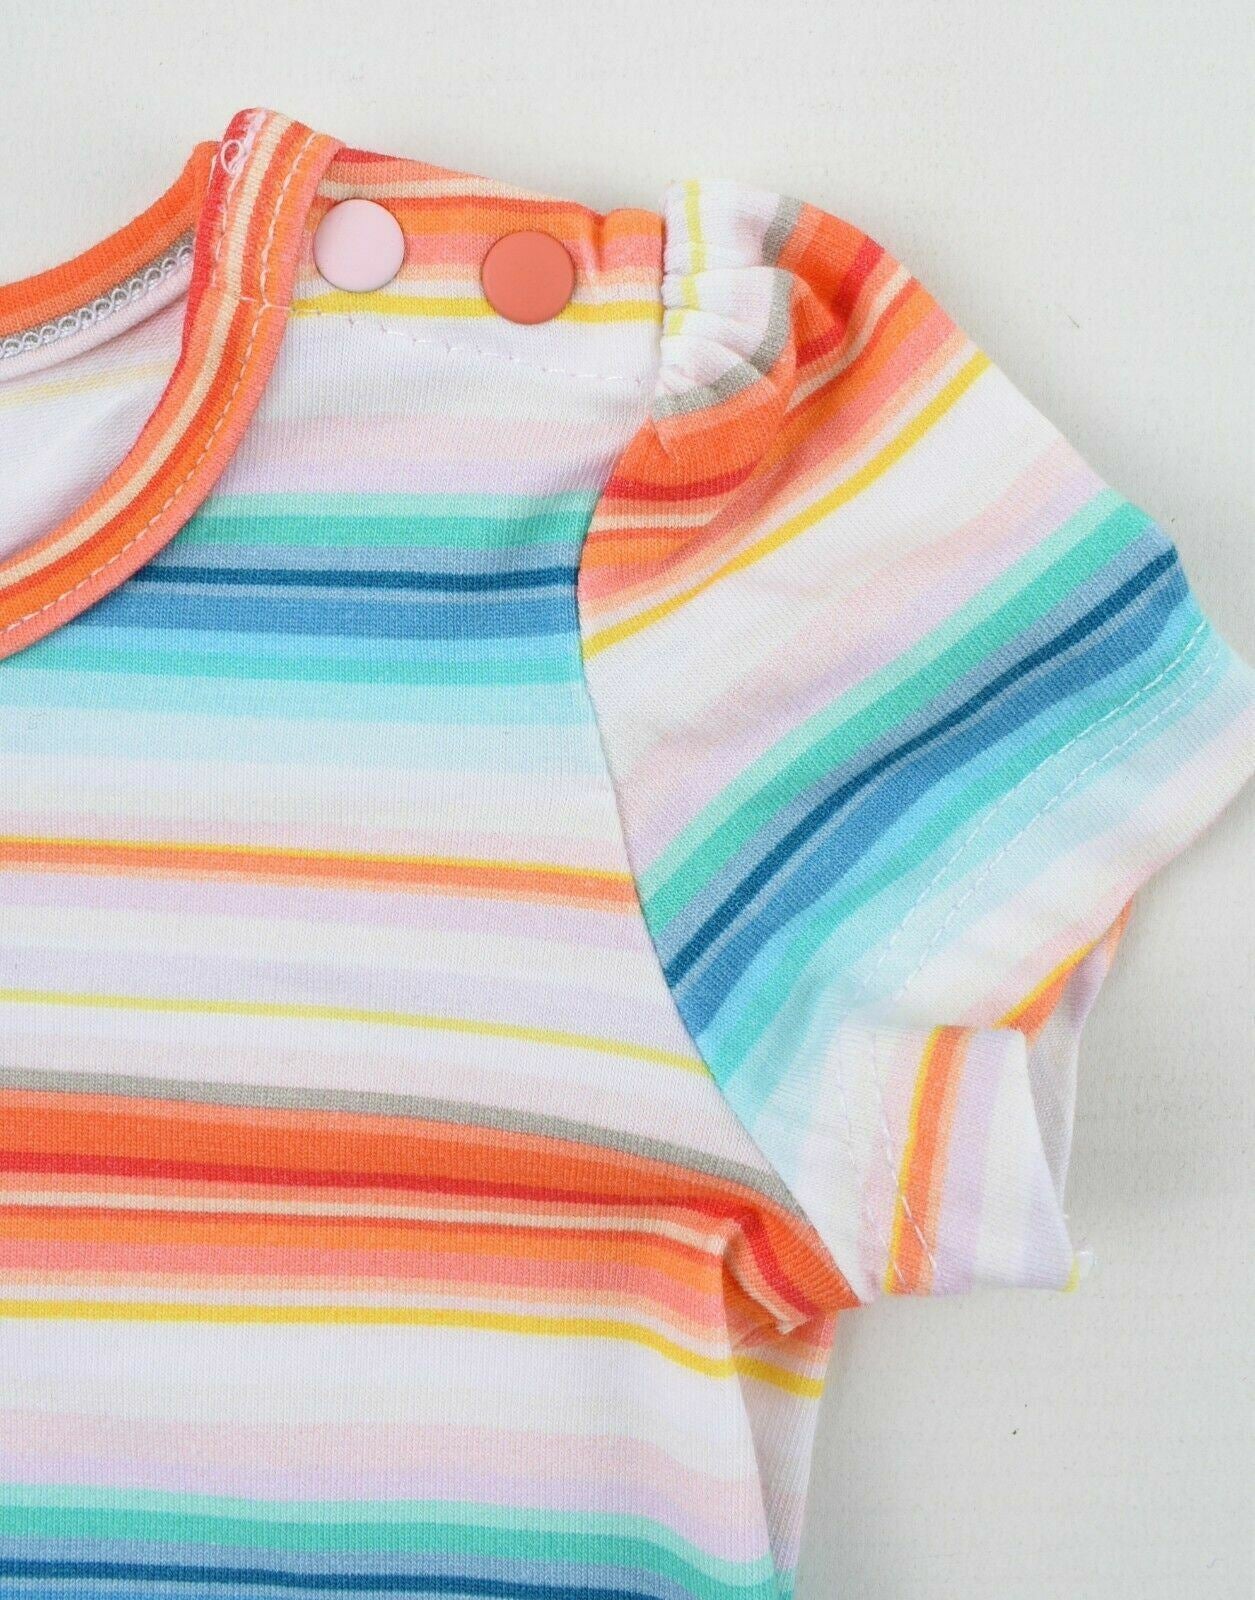 PAUL SMITH Baby Girls' Striped T-shirt Top, Multicoloured, size 9 months